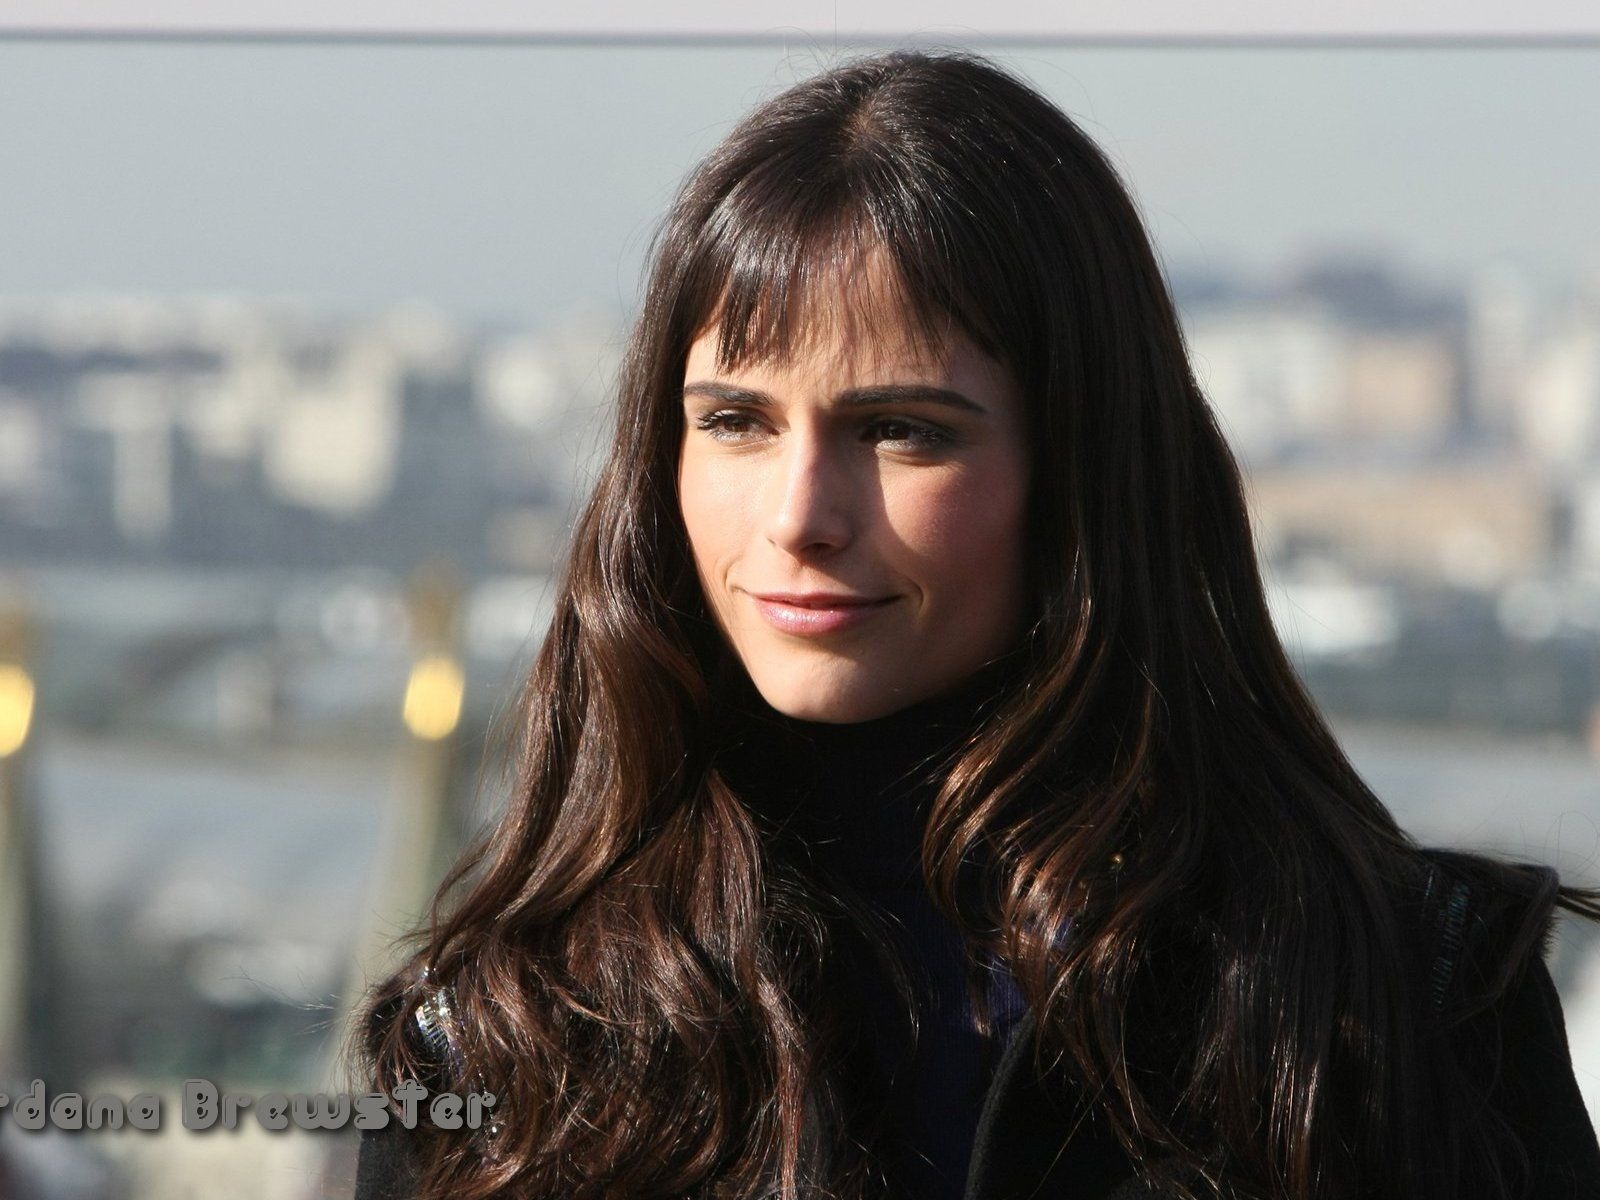 Jordana Brewster #018 - 1600x1200 Wallpapers Pictures Photos Images